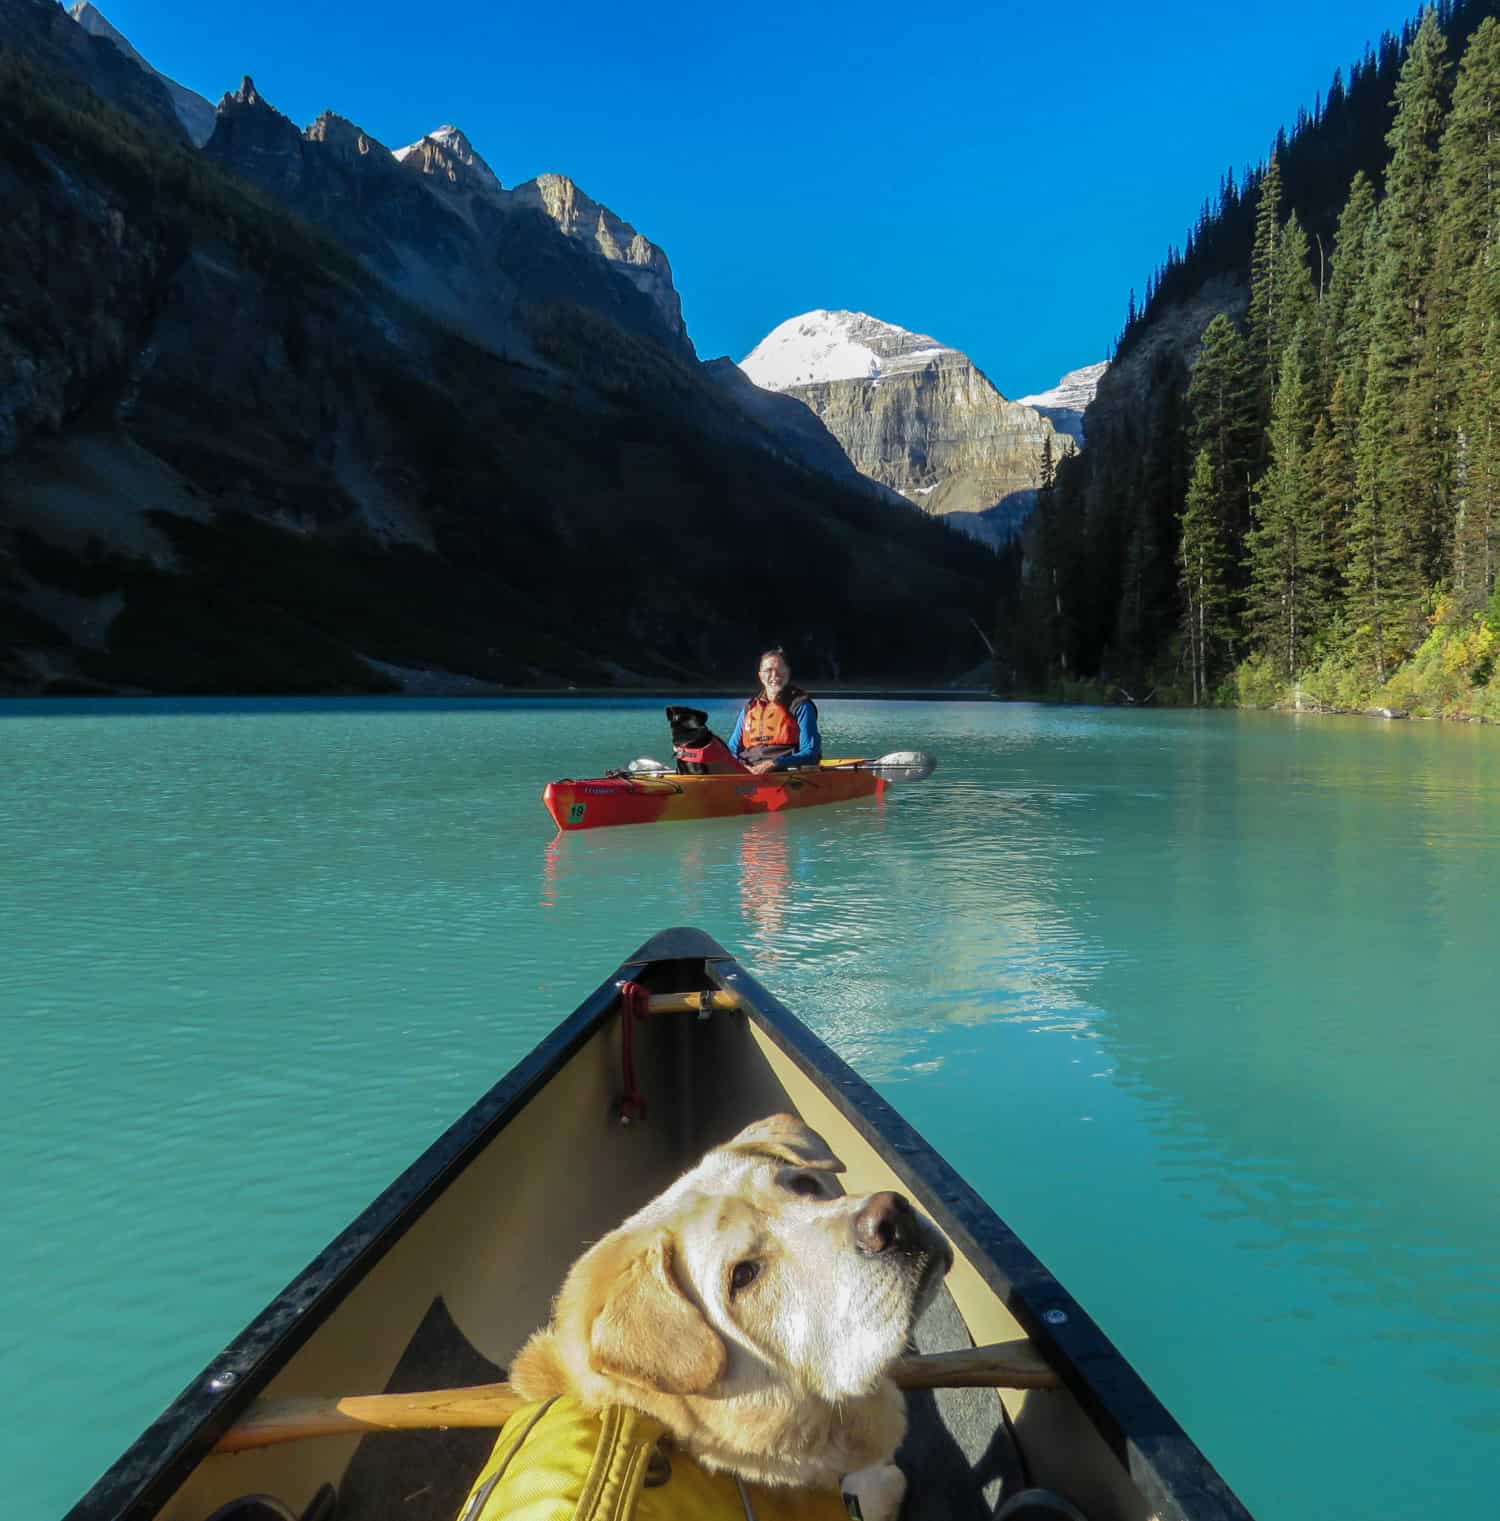 Tips for Canoeing and Kayaking with Dogs | GoPetFriendly.com